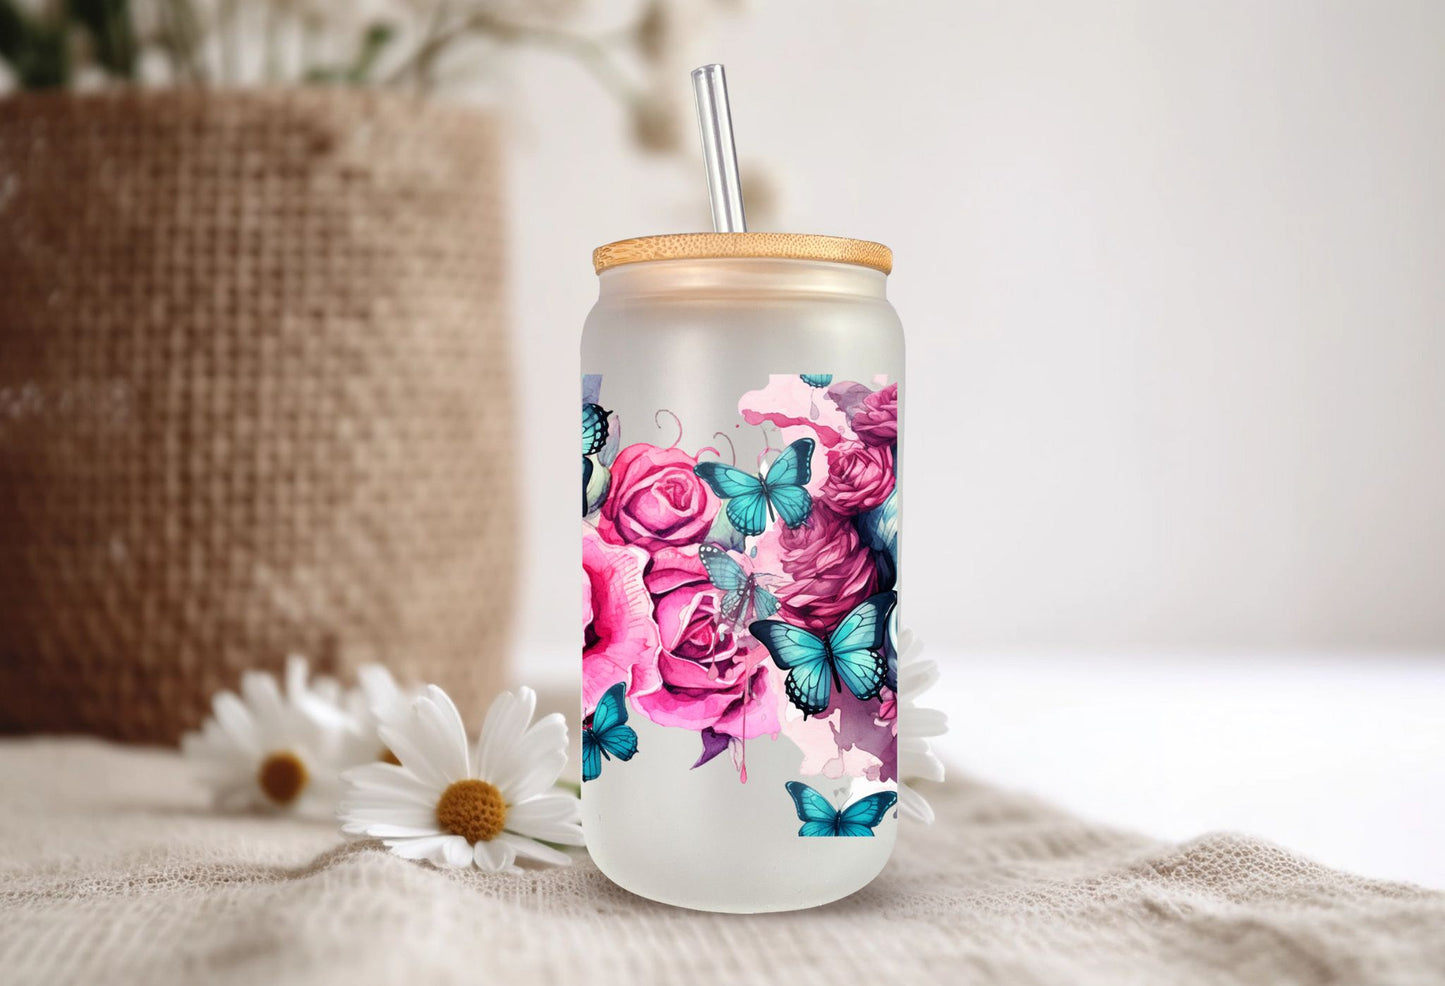 Enjoy your favorite beverage in our Pretty Skeleton 16 oz Libbey Style Glass Cup with Bamboo lid and straw